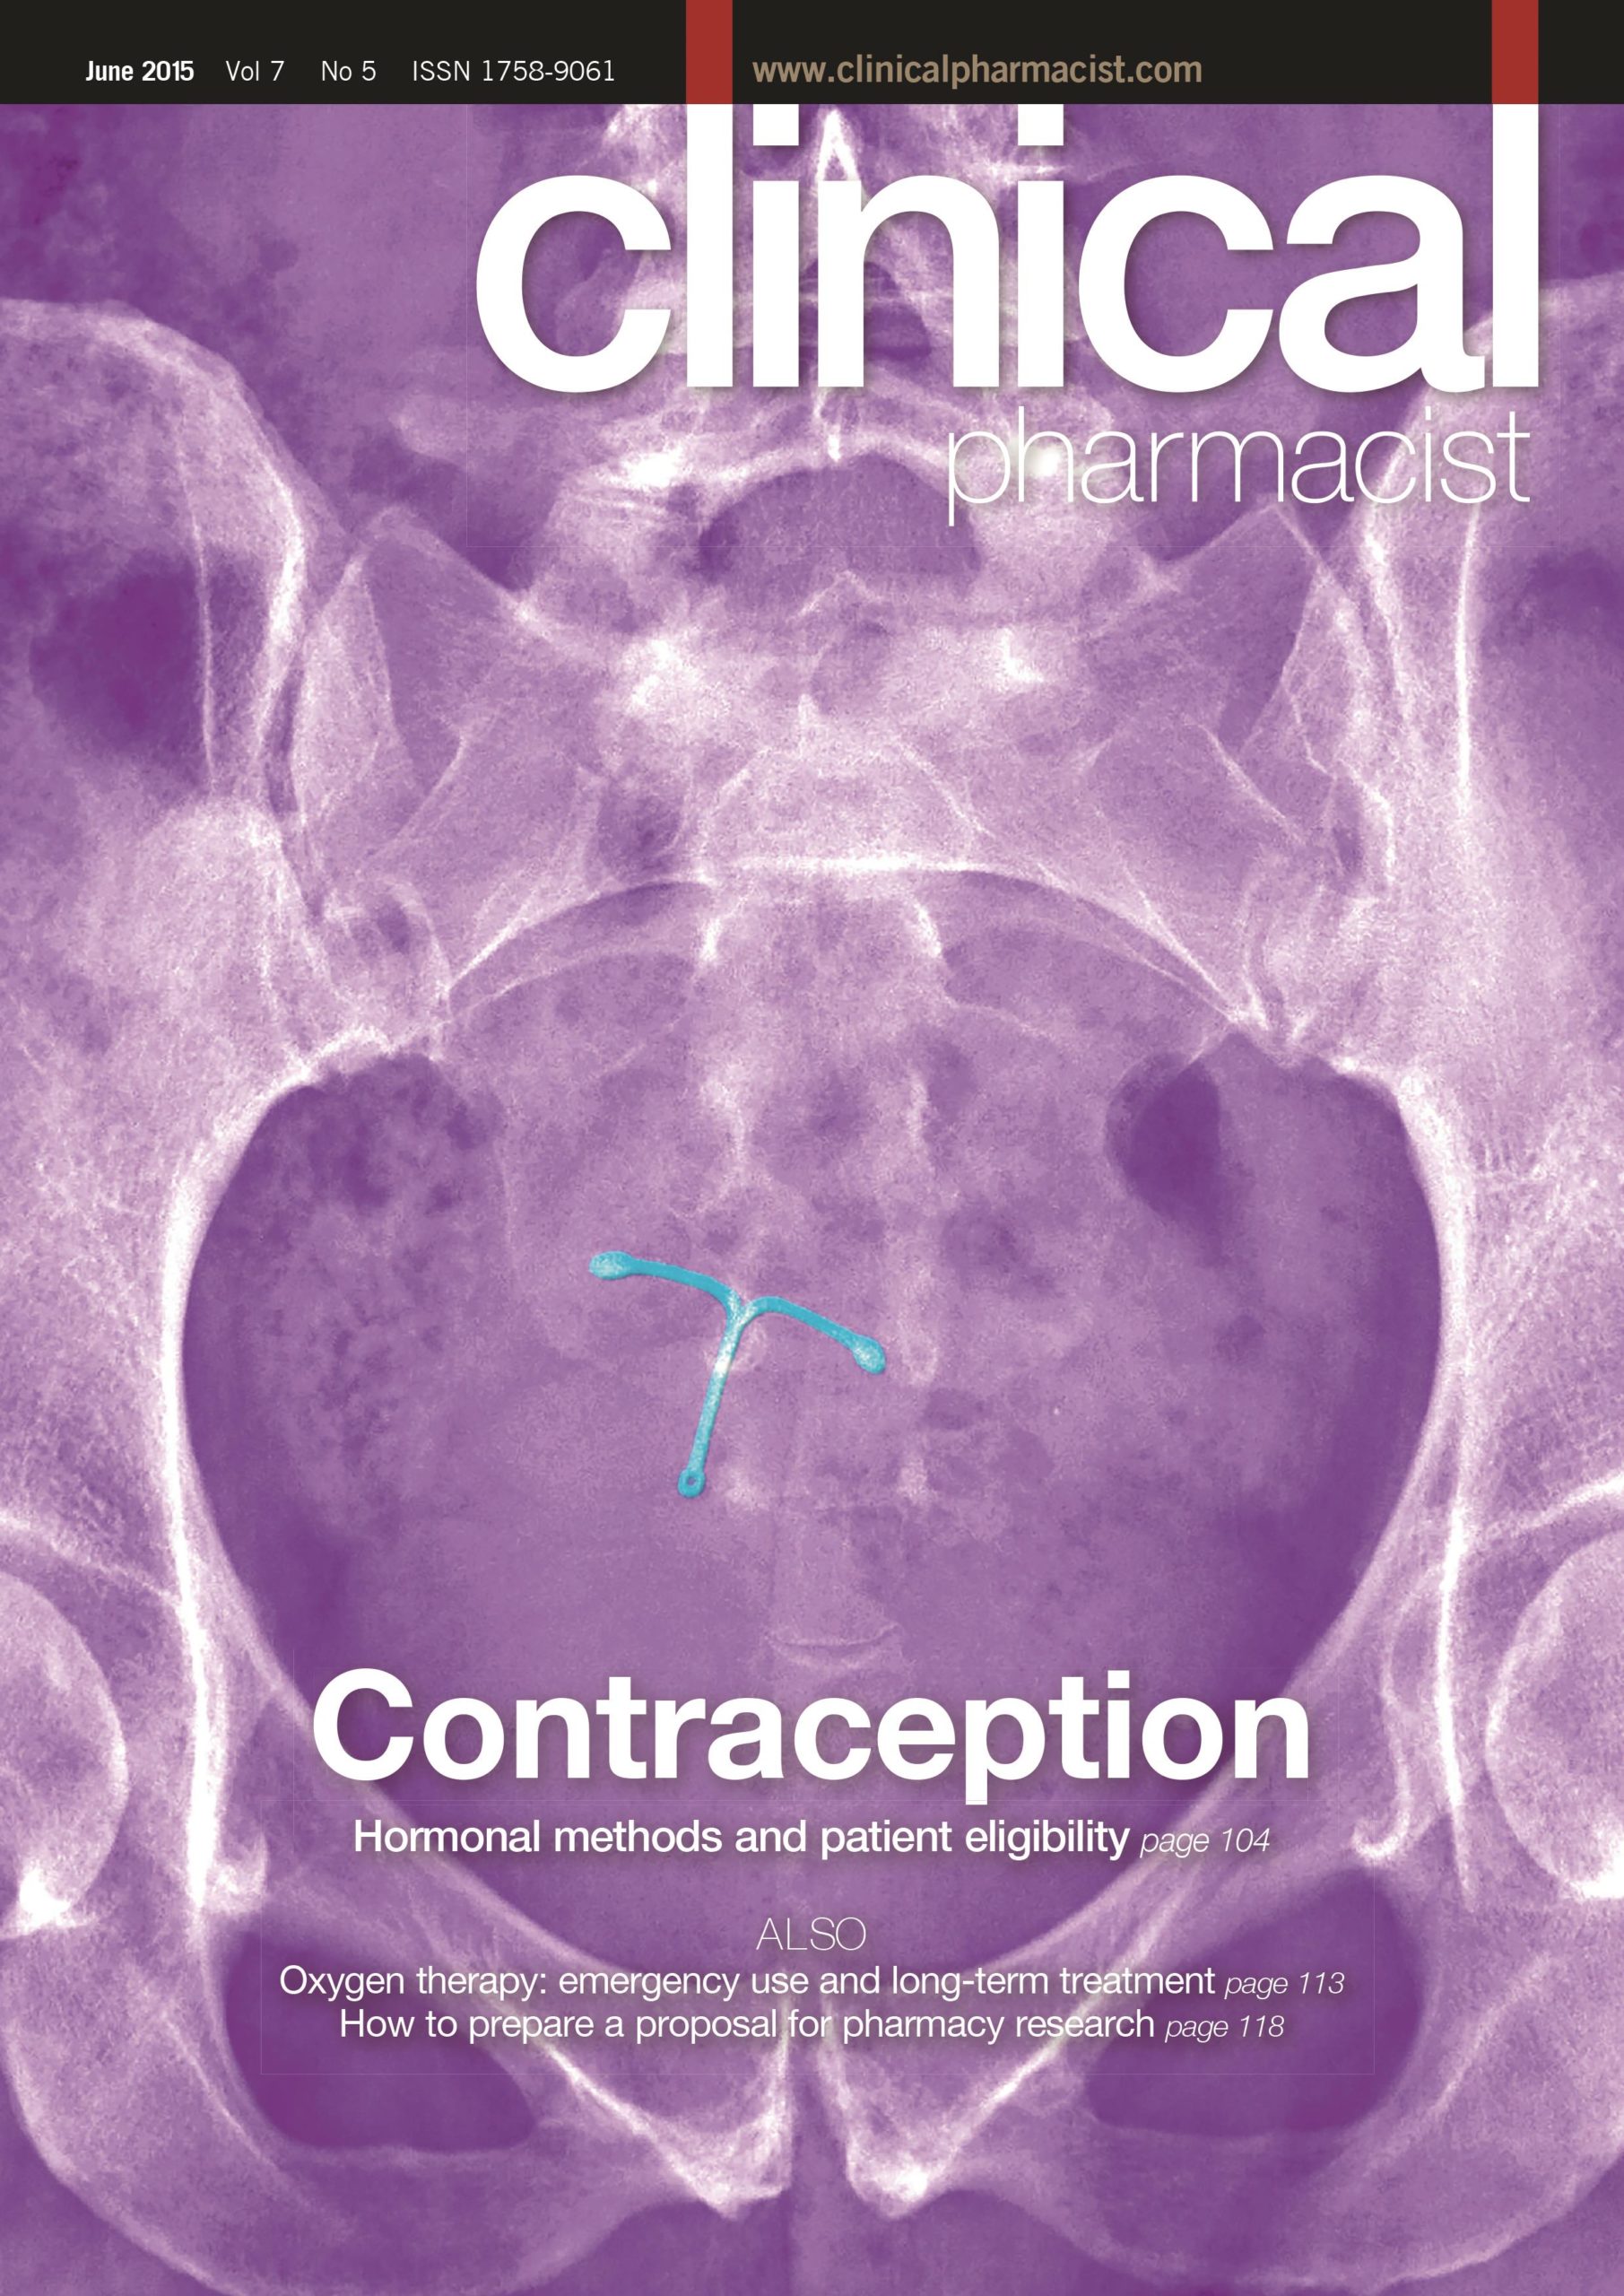 Publication issue cover for CP, June 2015, Vol 7, No 5